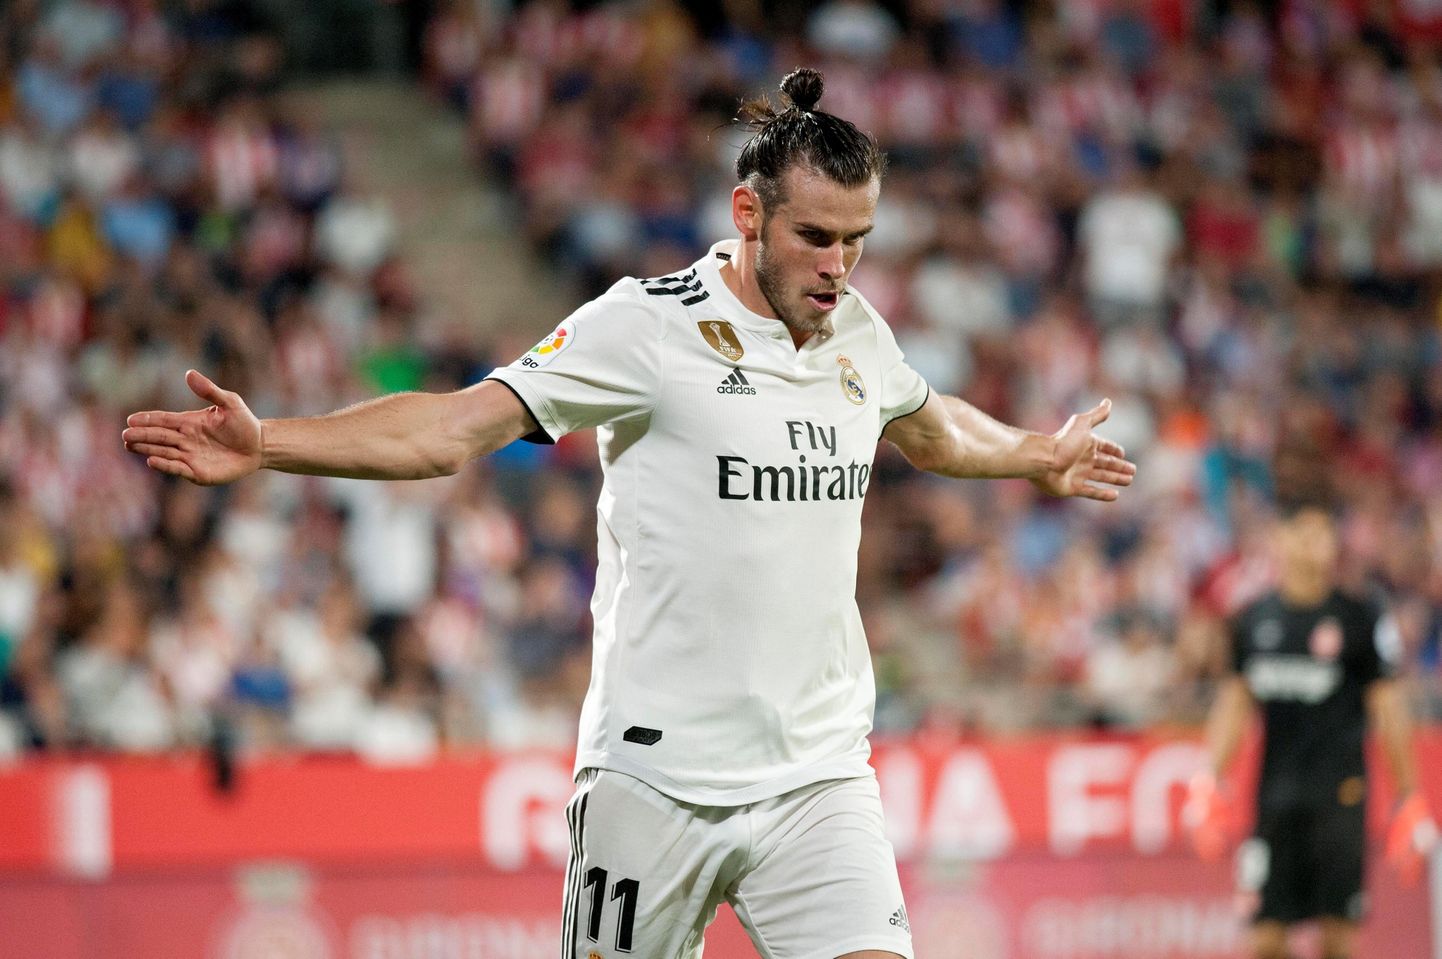 Real Madrid's forward Gareth Bale celebrates the third goal of his team against Girona during a game of LaLiga, in Girona, Spain, 26 August 2018.  EPA/ROBIN TOWNSEND